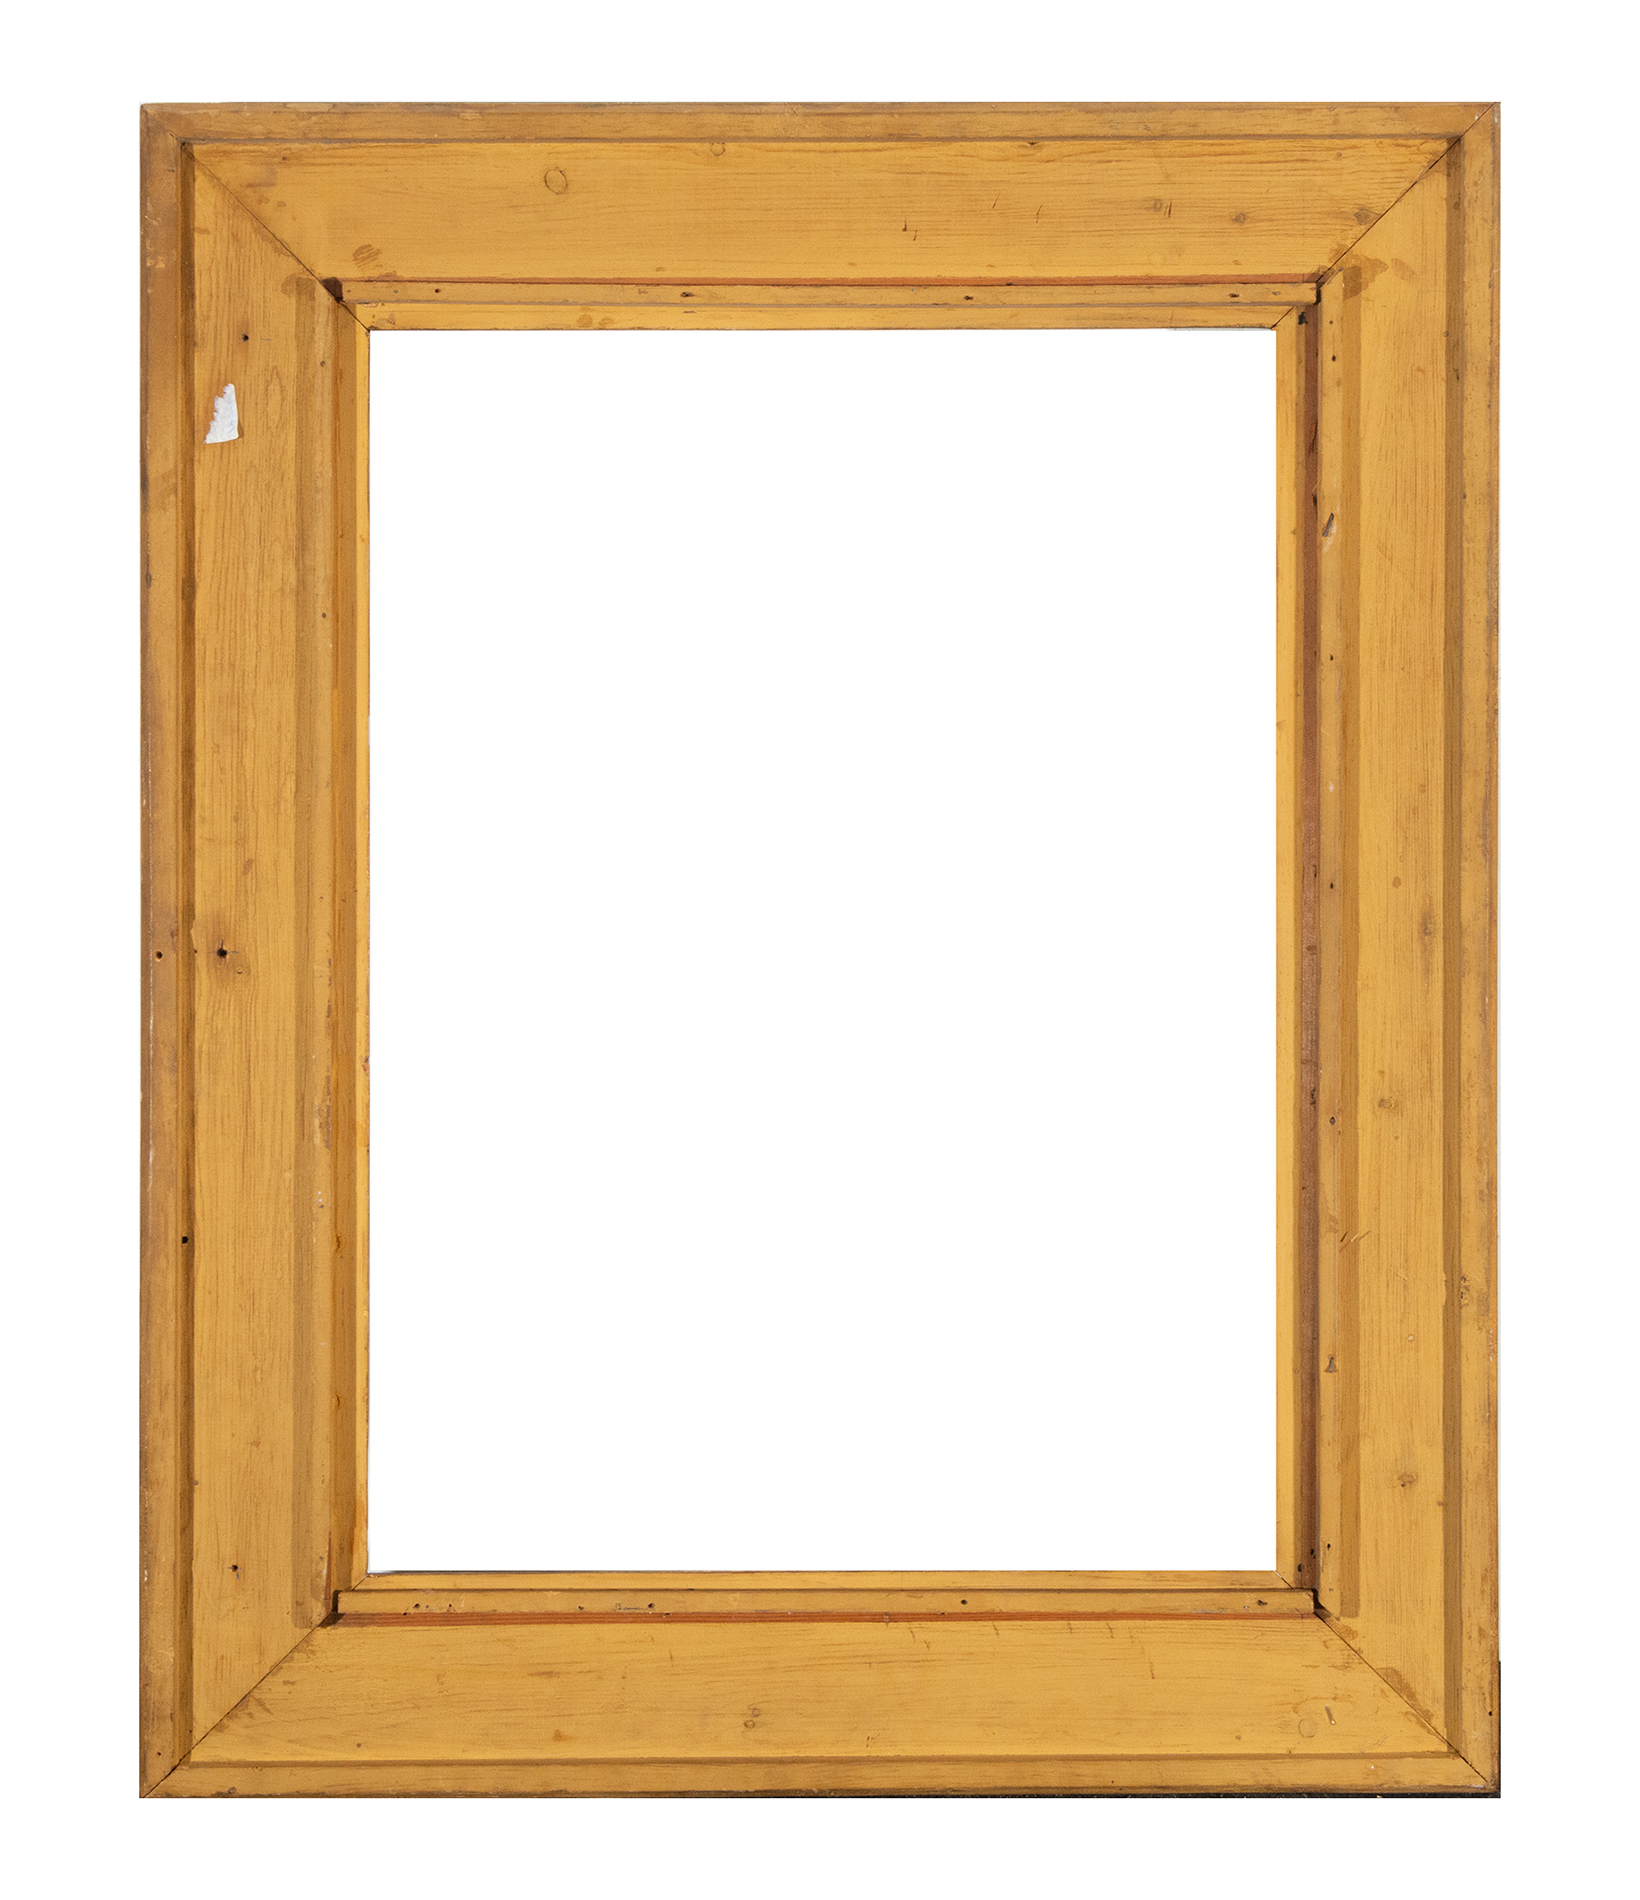 English Elizabethan style frame, in gilt wood and moulding, late 19th century - Image 2 of 2